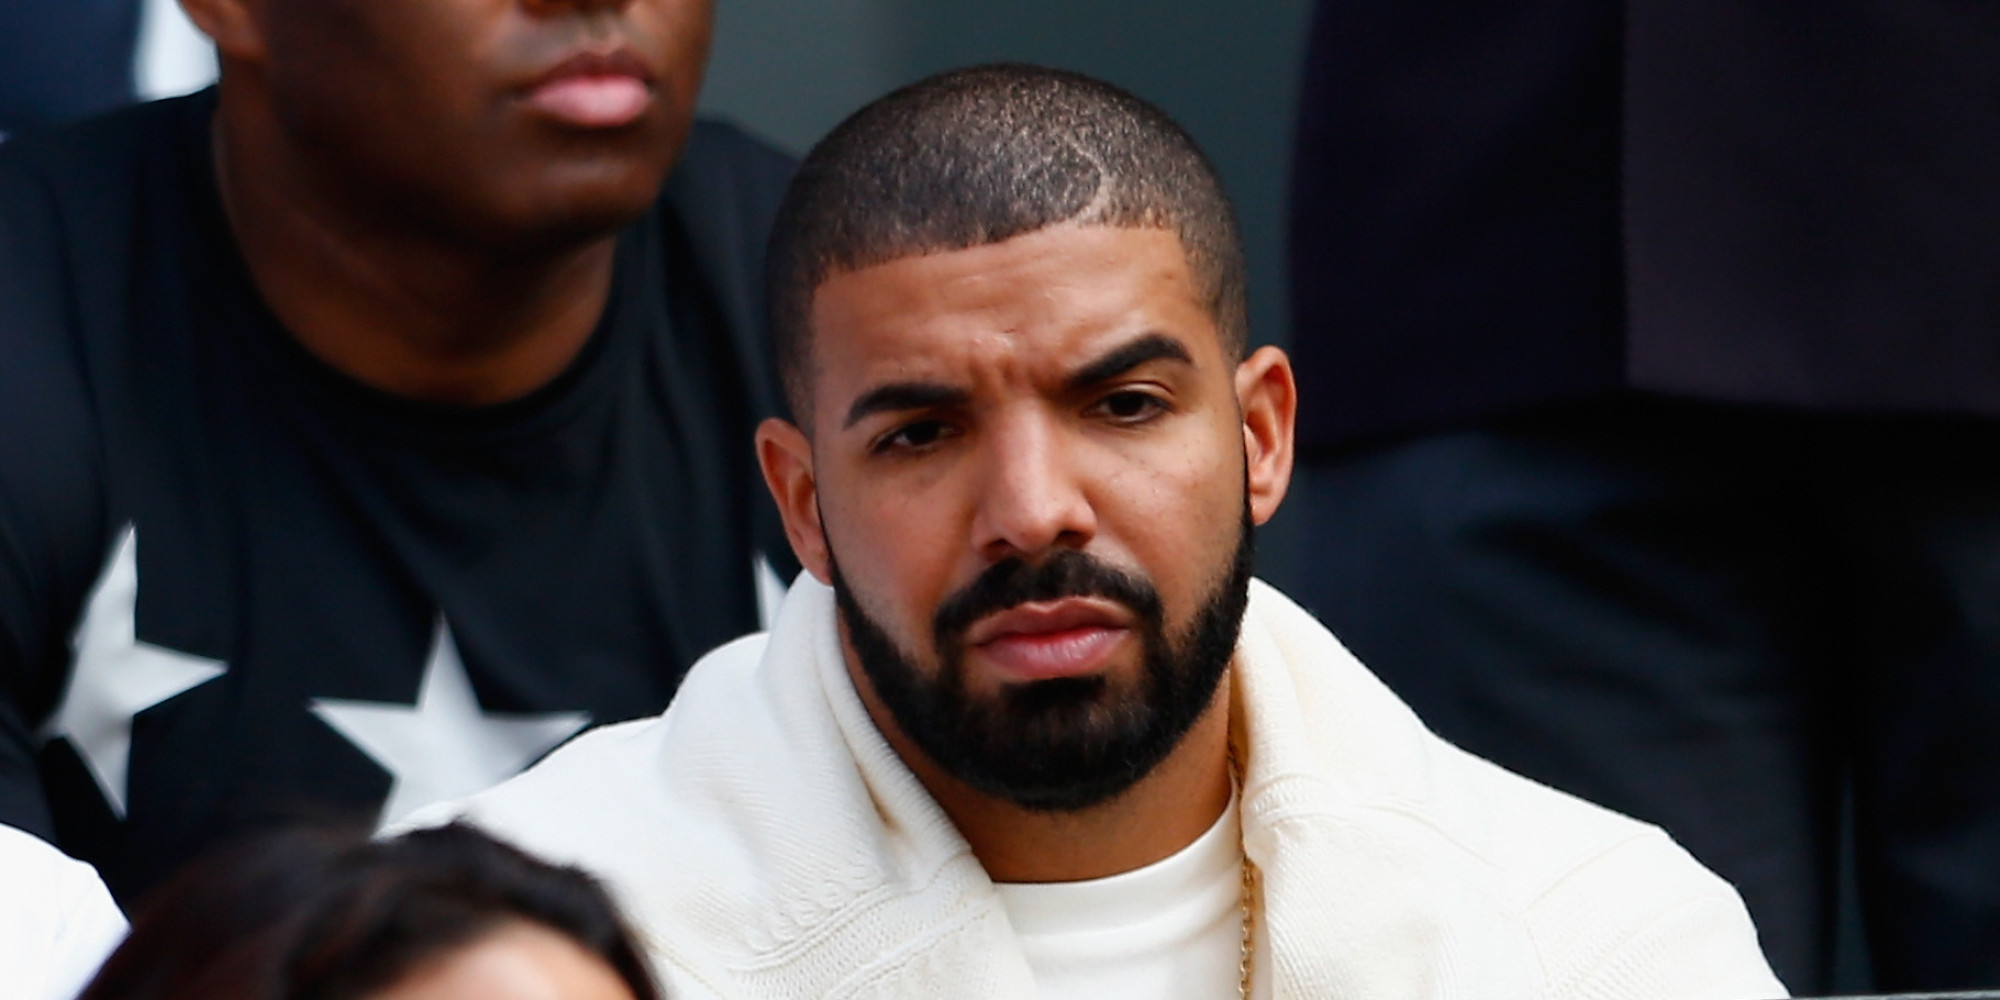 LONDON, ENGLAND - JULY 11: Drake attends day twelve of the Wimbledon Lawn Tennis Championships at the All England Lawn Tennis and Croquet Club on July 11, 2015 in London, England. (Photo by Julian Finney/Getty Images)